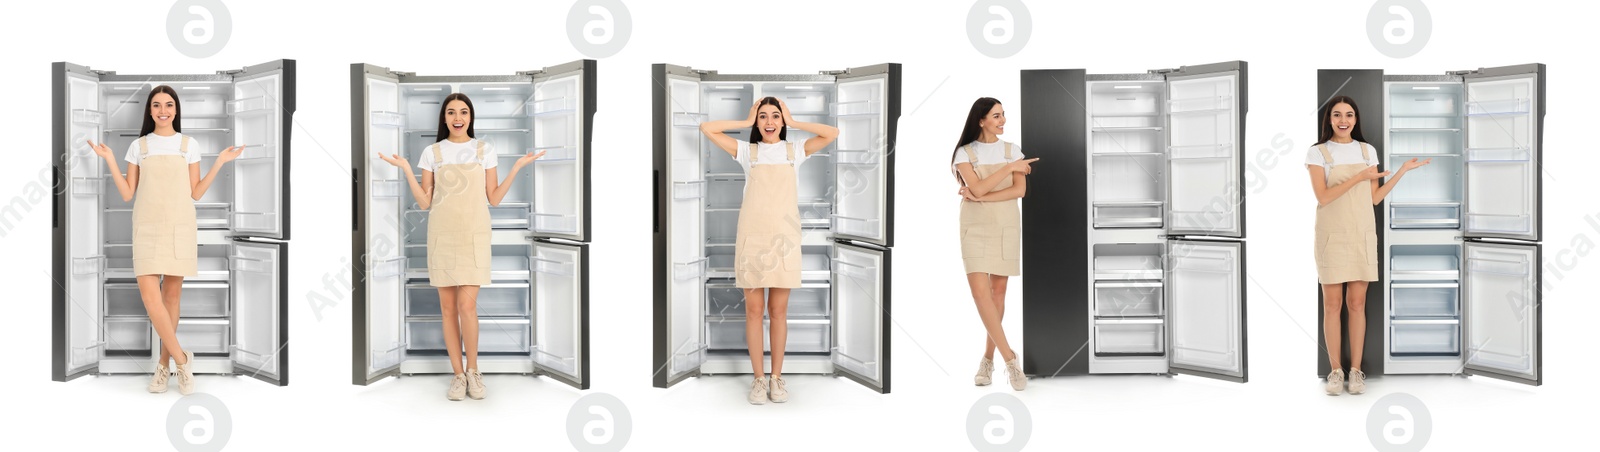 Image of Collage of woman near open empty refrigerators on white background